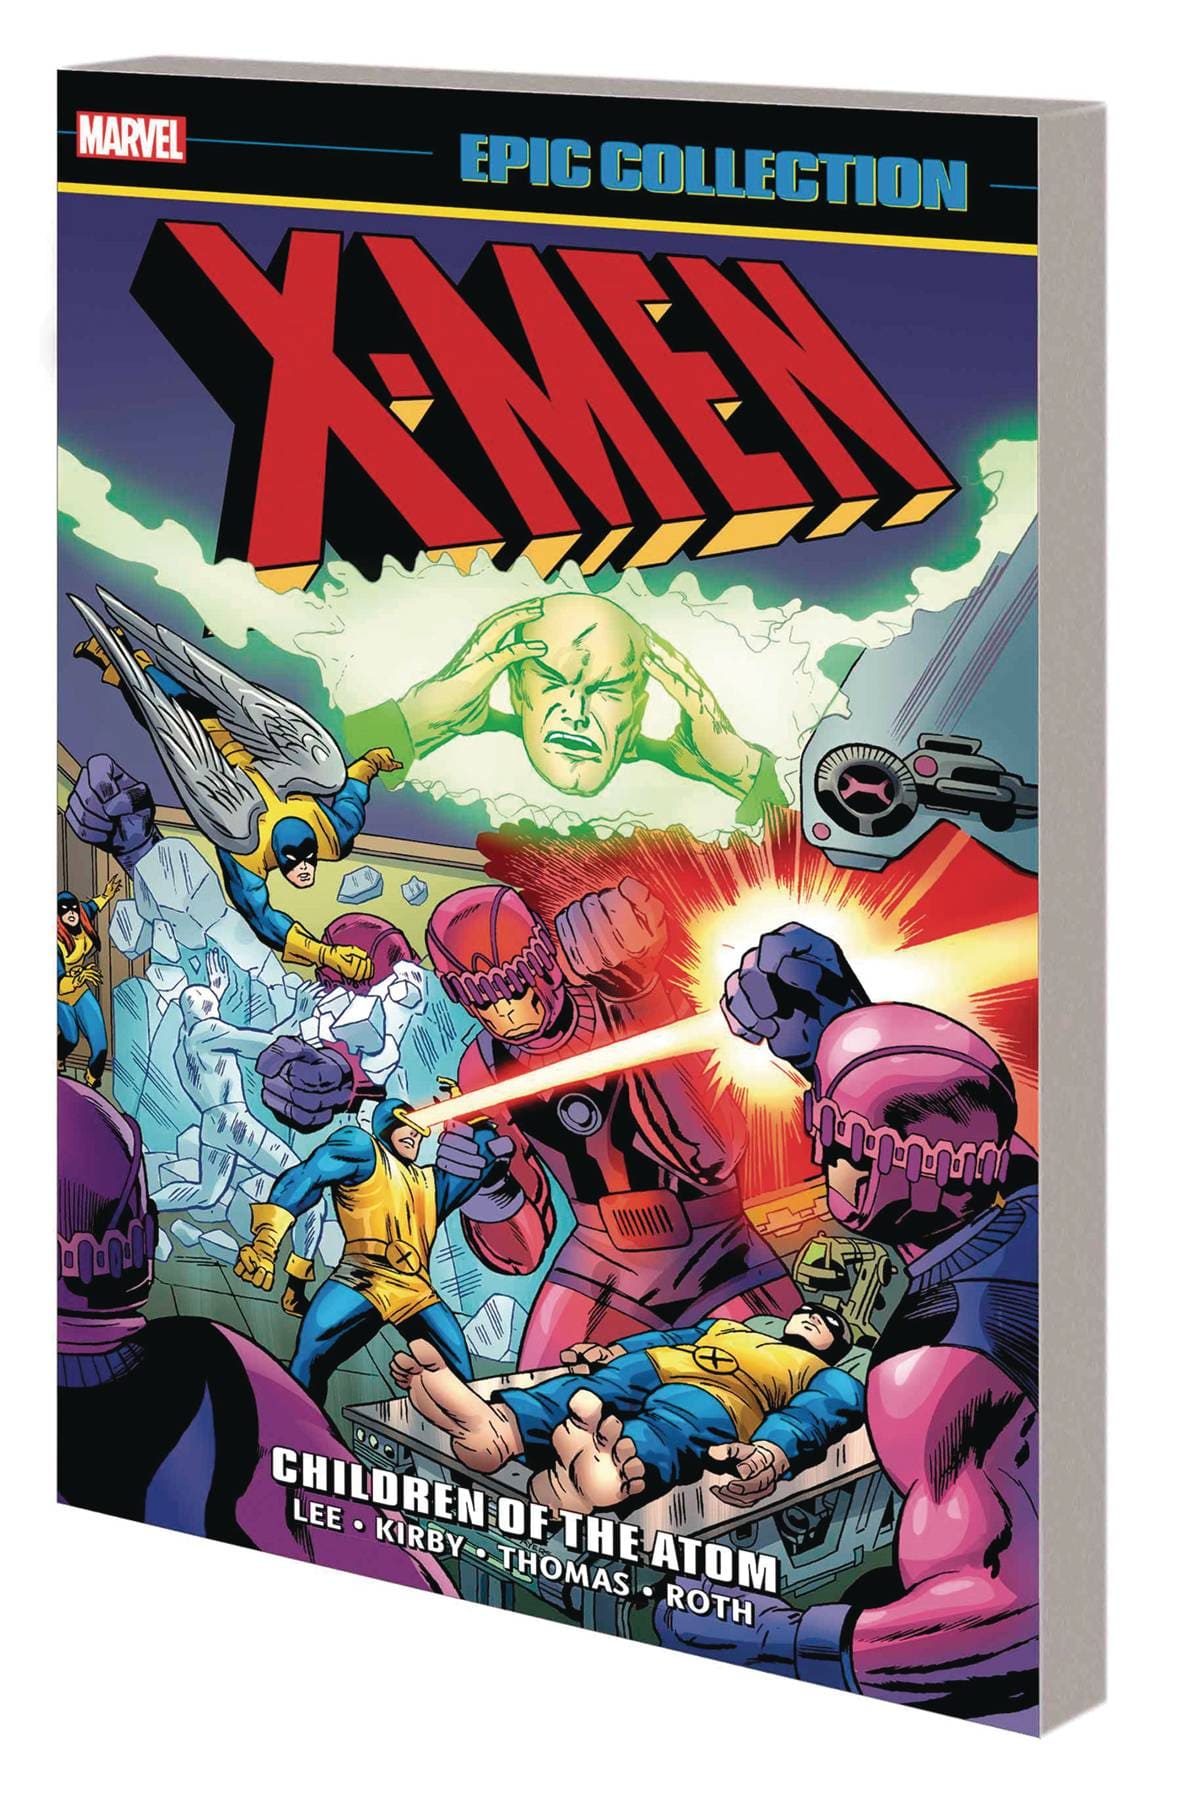 X-MEN EPIC COLLECT TP VOL O1 CHILDREN OF THE ATOM NEW PTG 2